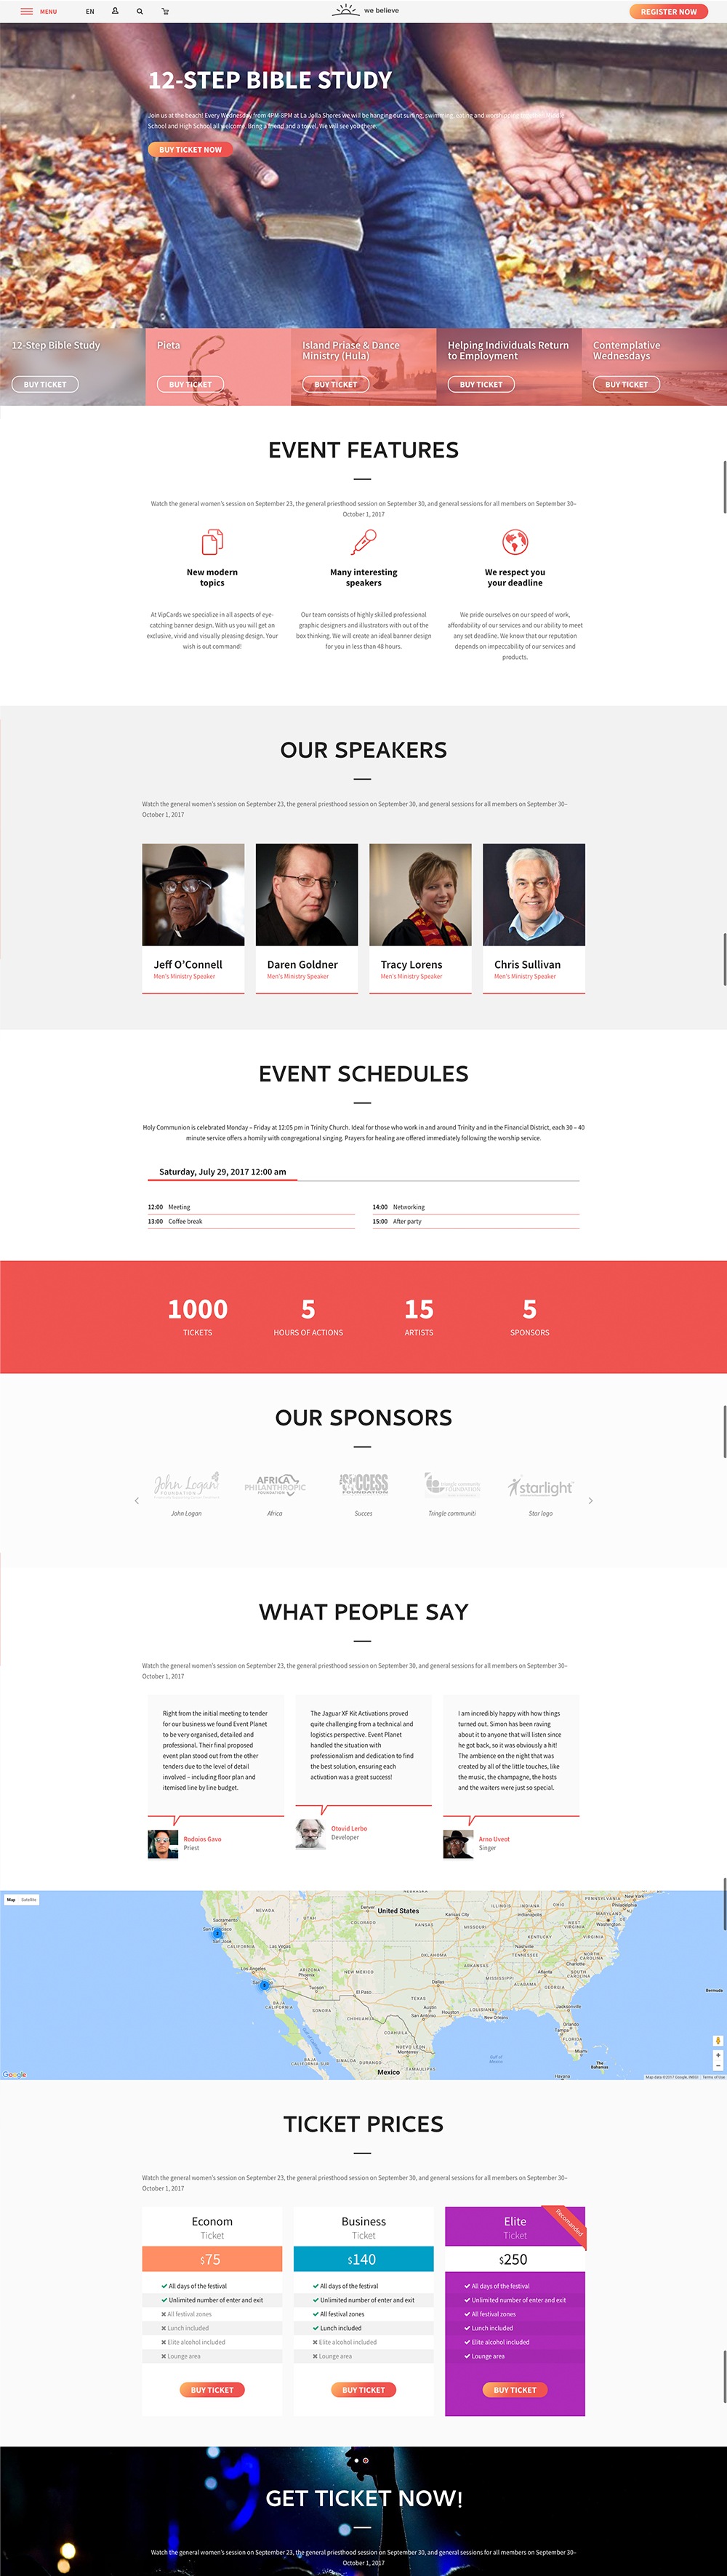 Buy events WP themes 2017